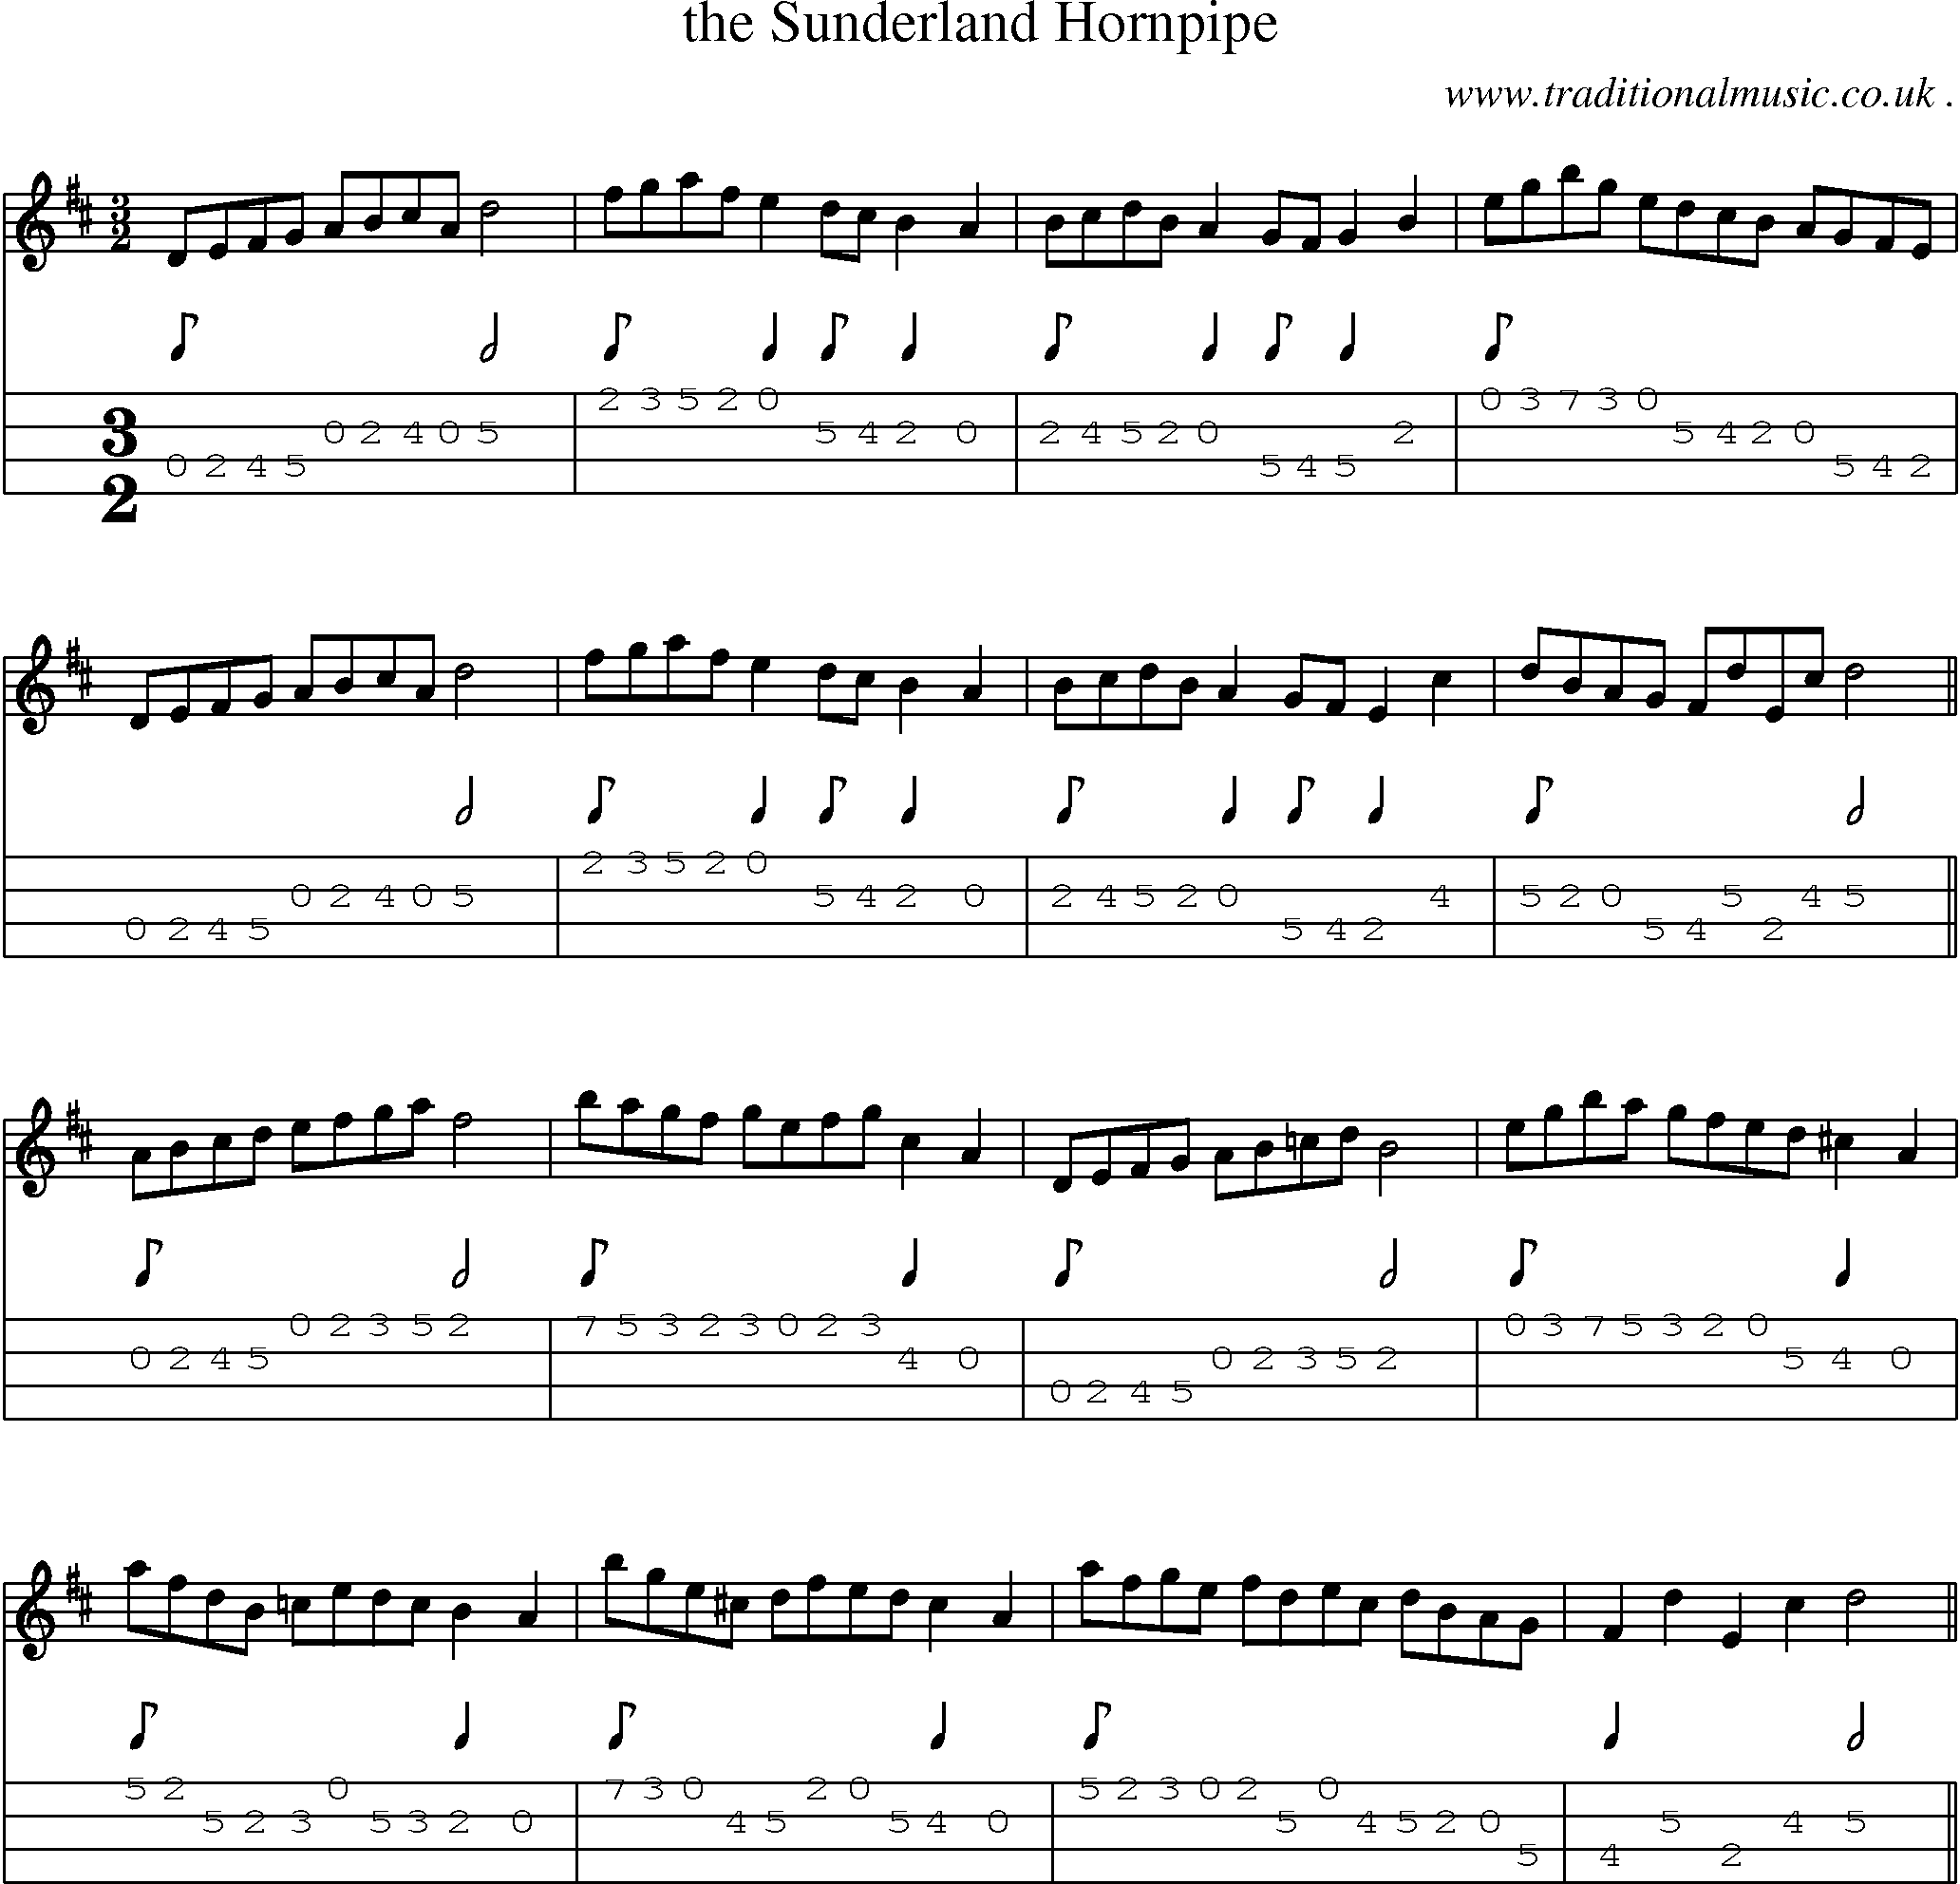 Sheet-Music and Mandolin Tabs for The Sunderland Hornpipe